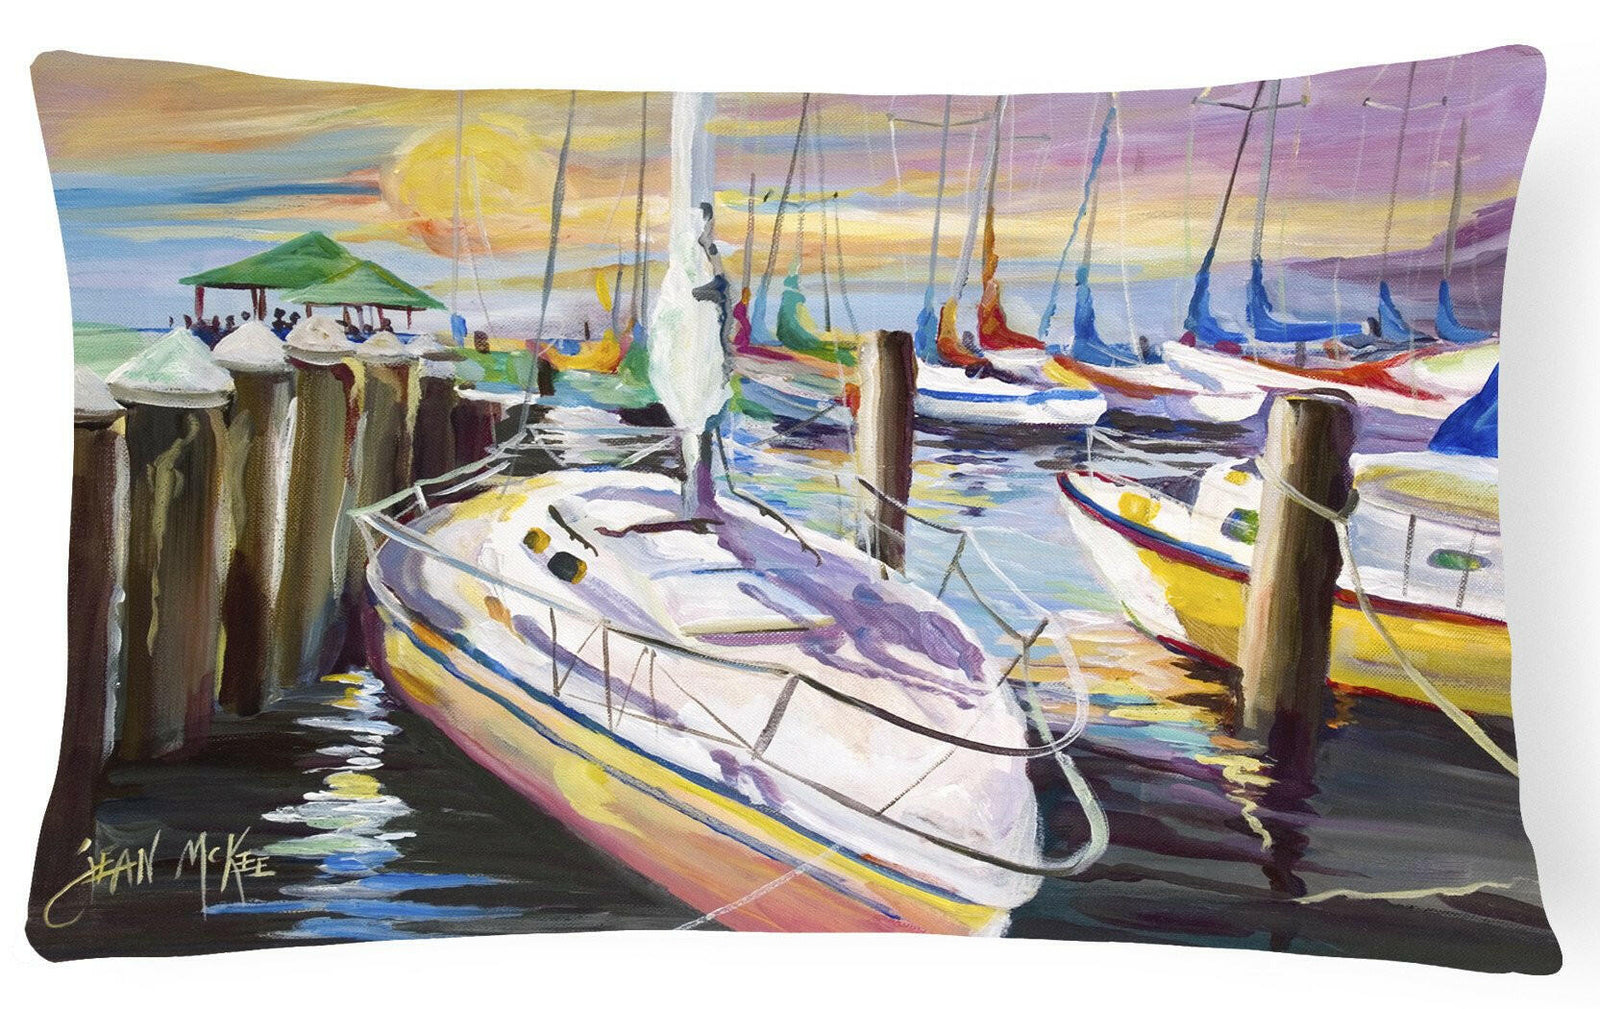 Sailboats at the Fairhope Yacht Club Docks Canvas Fabric Decorative Pillow by Caroline's Treasures